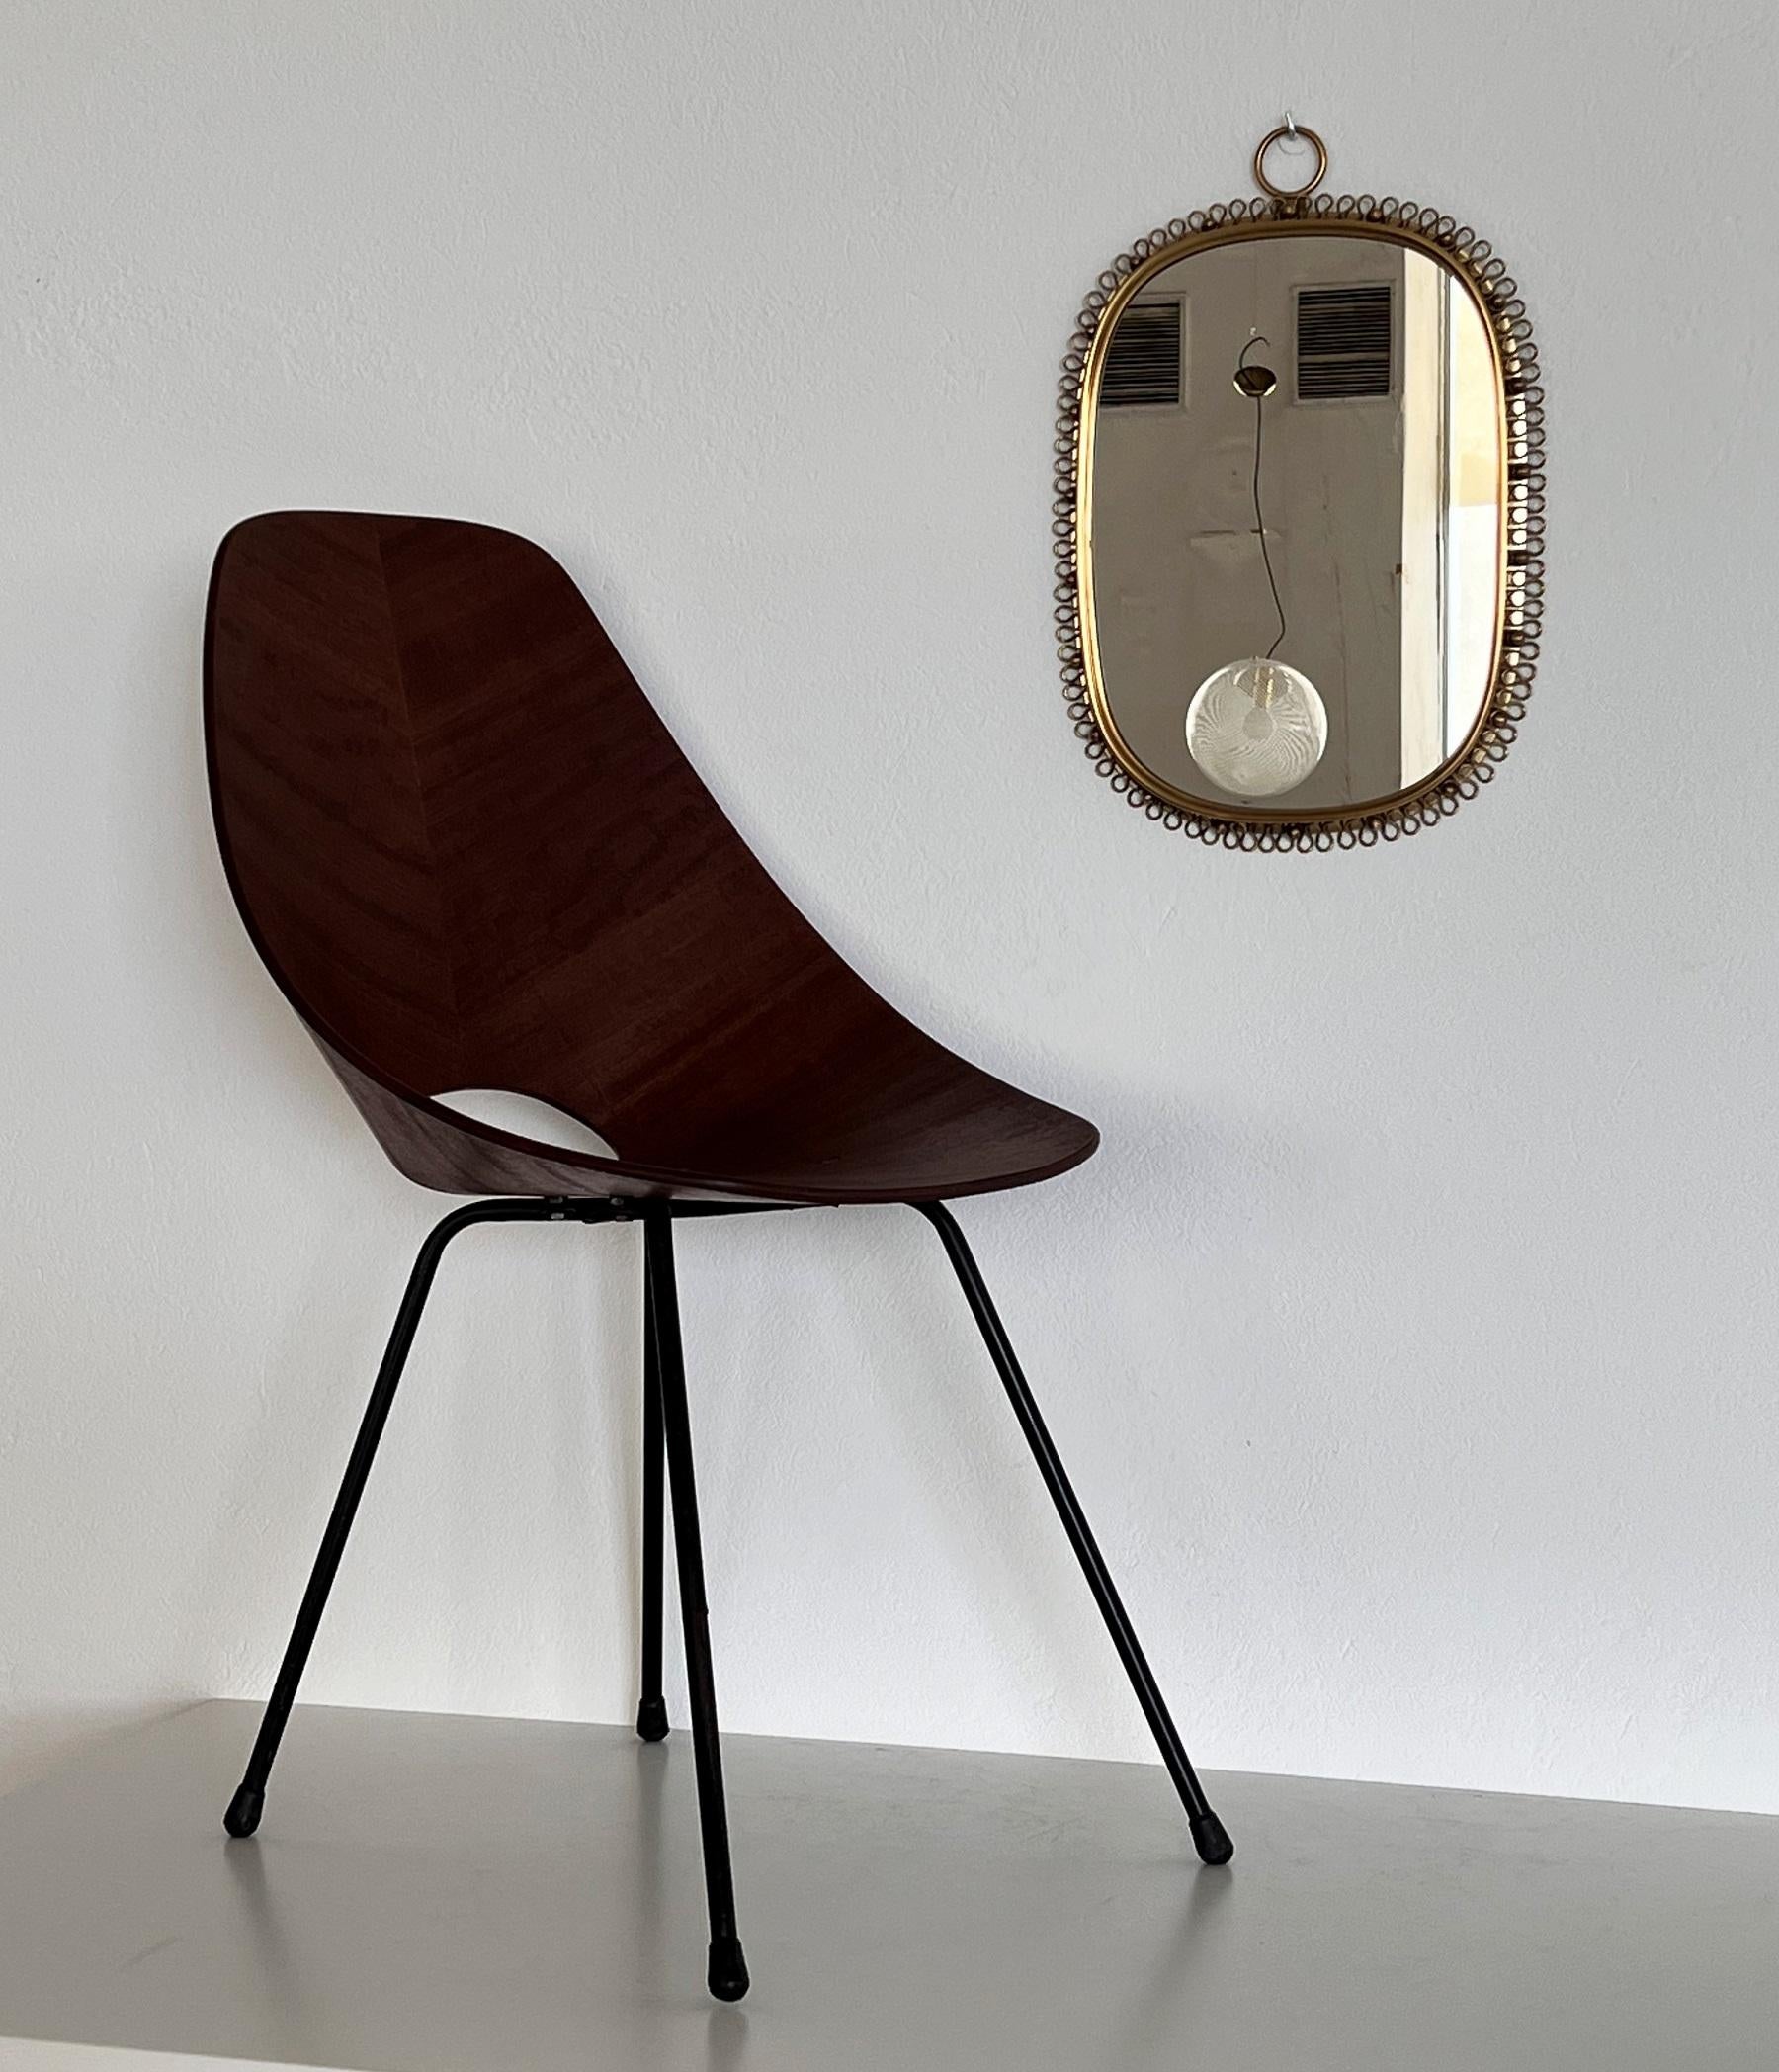 Wall Mirror with Loop Frame in Brass by Josef Frank for Svenskt Tenn, 1950s 8